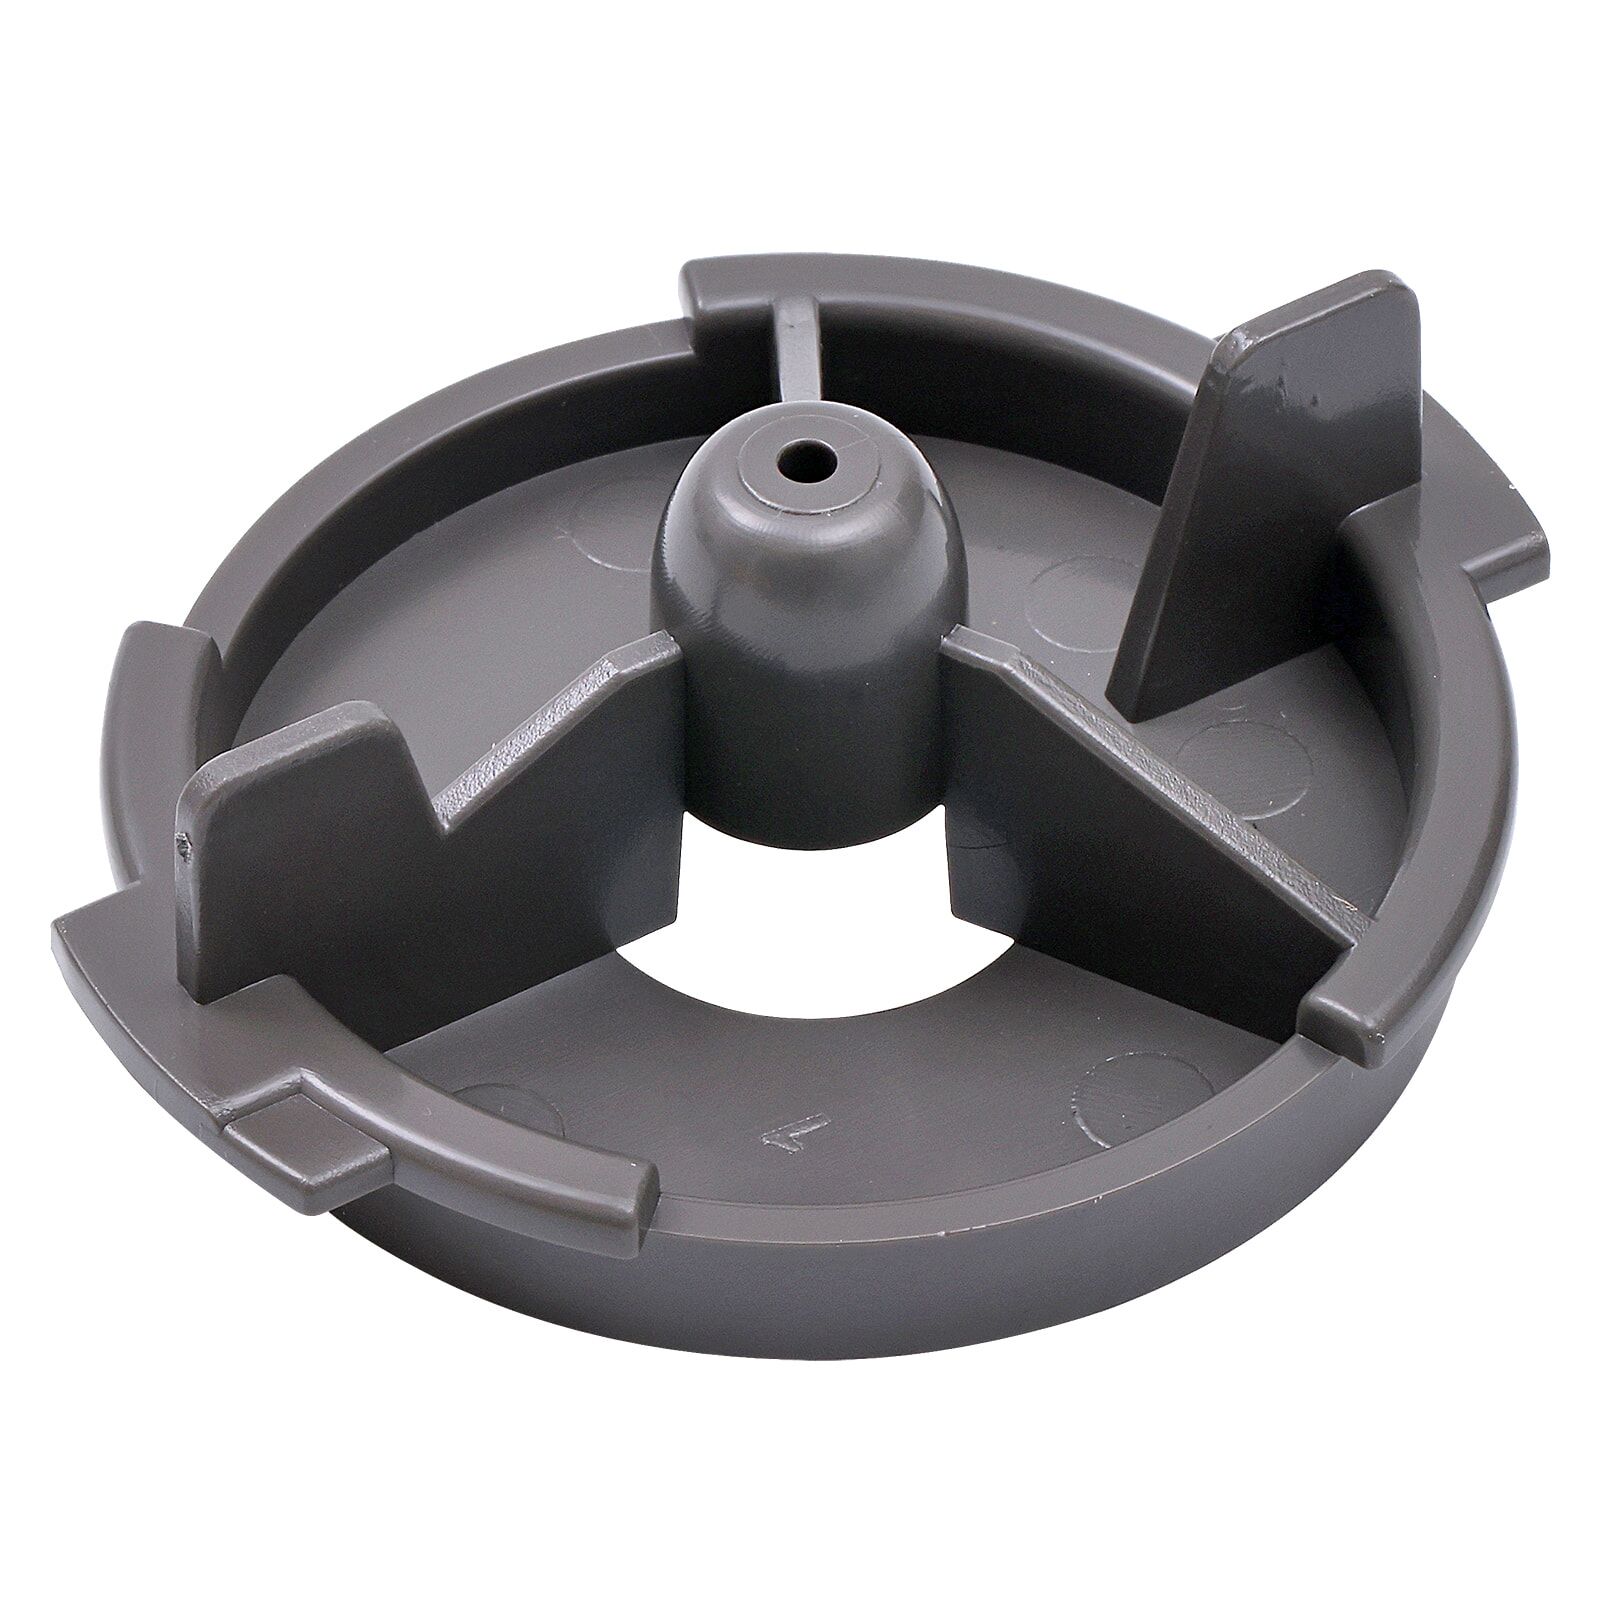 Oase - Replacement pump cover - BioMaster